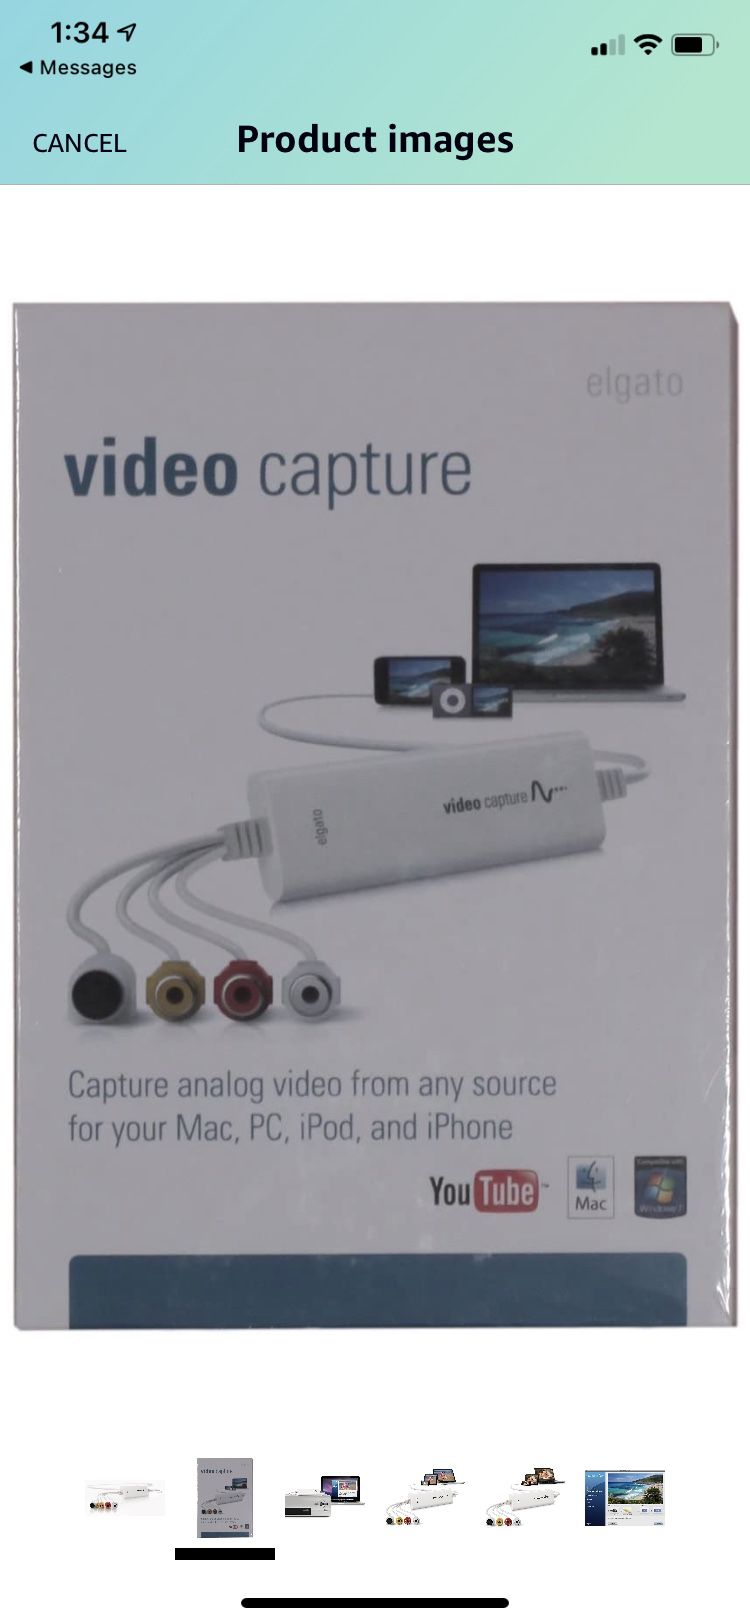 Capture Brannd New Analog Video For Your Mac, PC, iPad Or IPhone